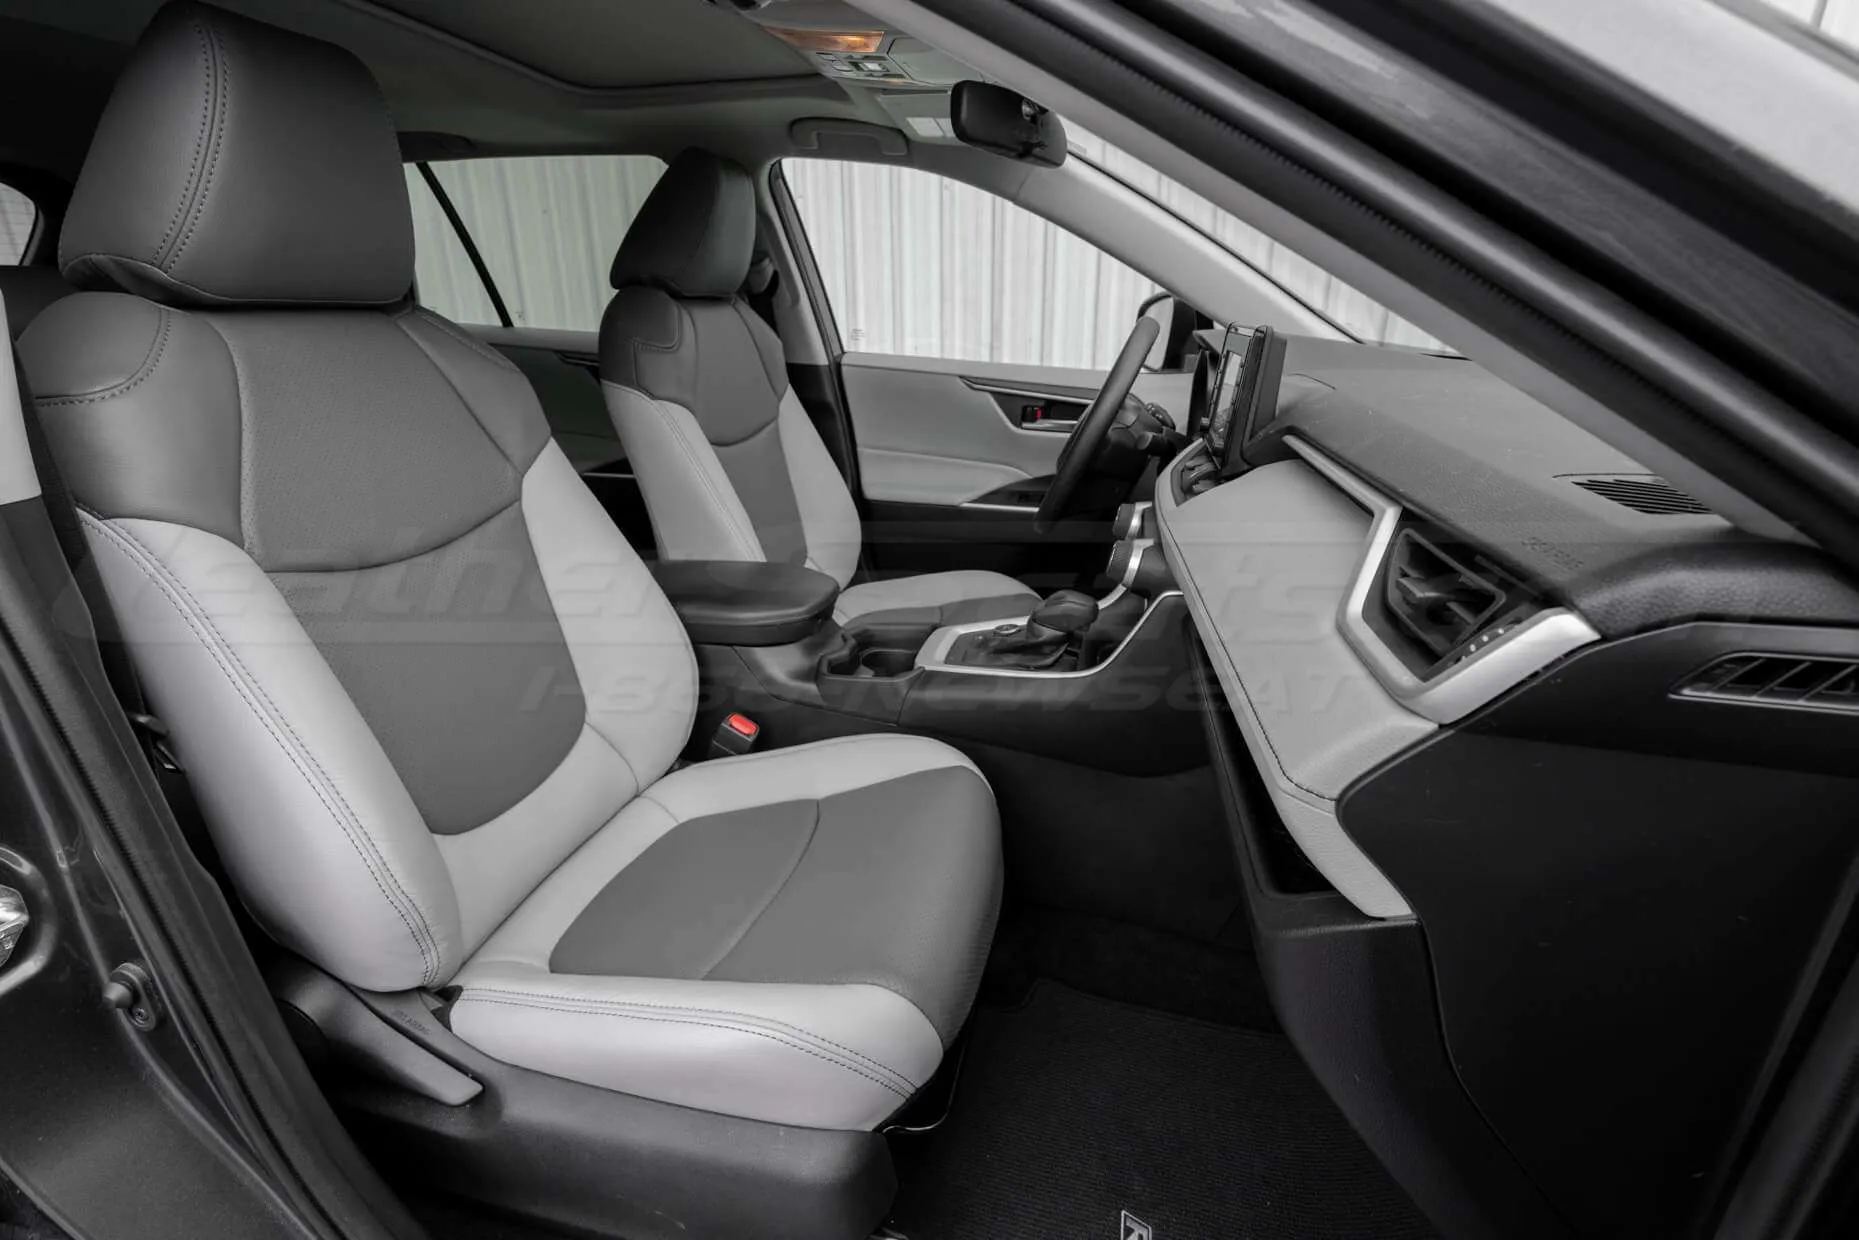 2019-2023 Toyota RAV4 custom two-tone leather interior - Dove Grey and Light Grey - Installed front passenger seat